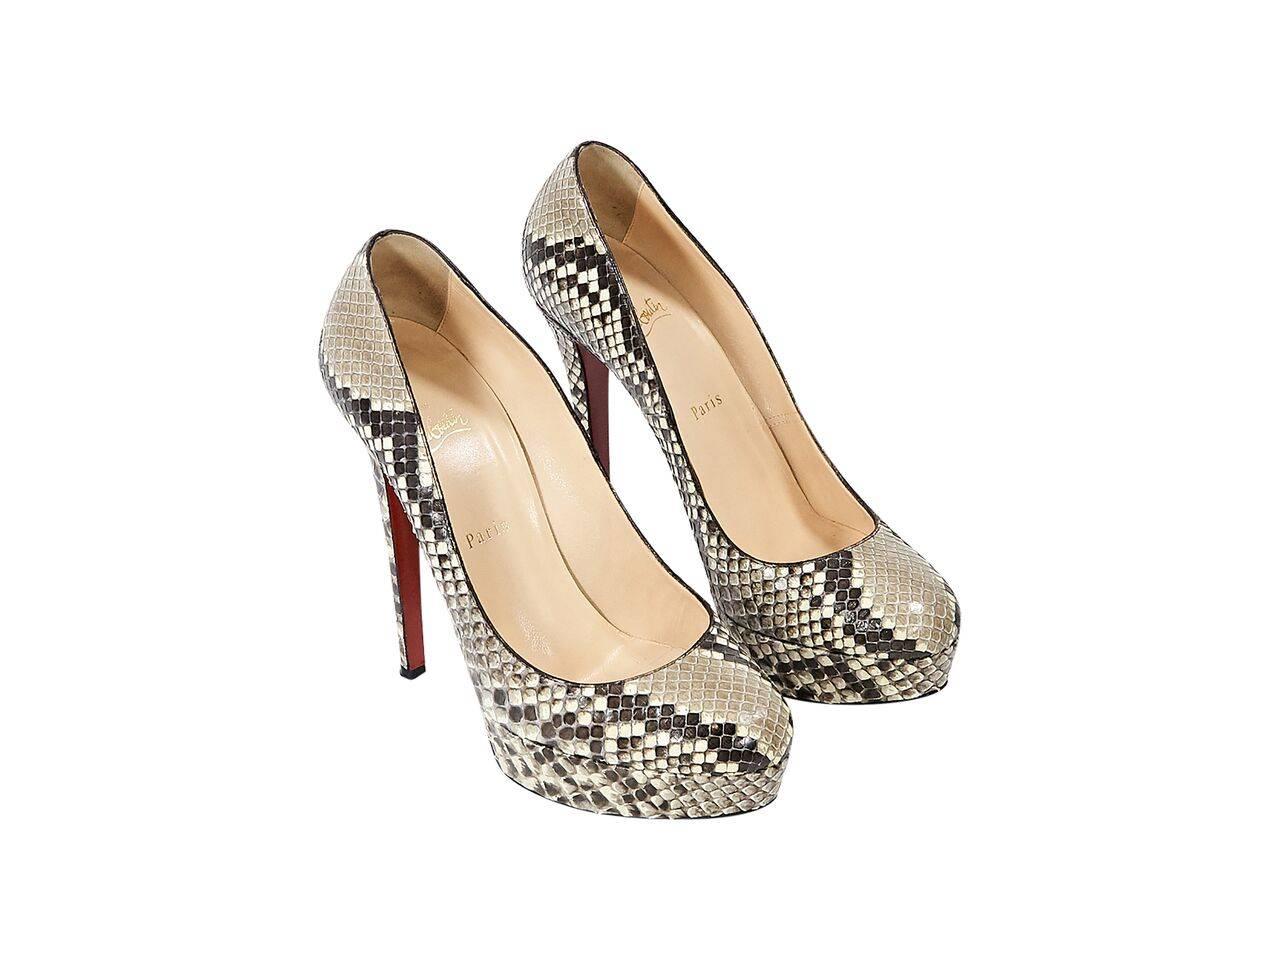 Product details:  Tan python Bianca pumps by Christian Louboutin.  Round toe.  Towering stiletto heel and platform design.  Iconic red sole.  Slip-on style. 
Condition: Pre-owned. Very good.  
Est. Retail $ 1,500.00